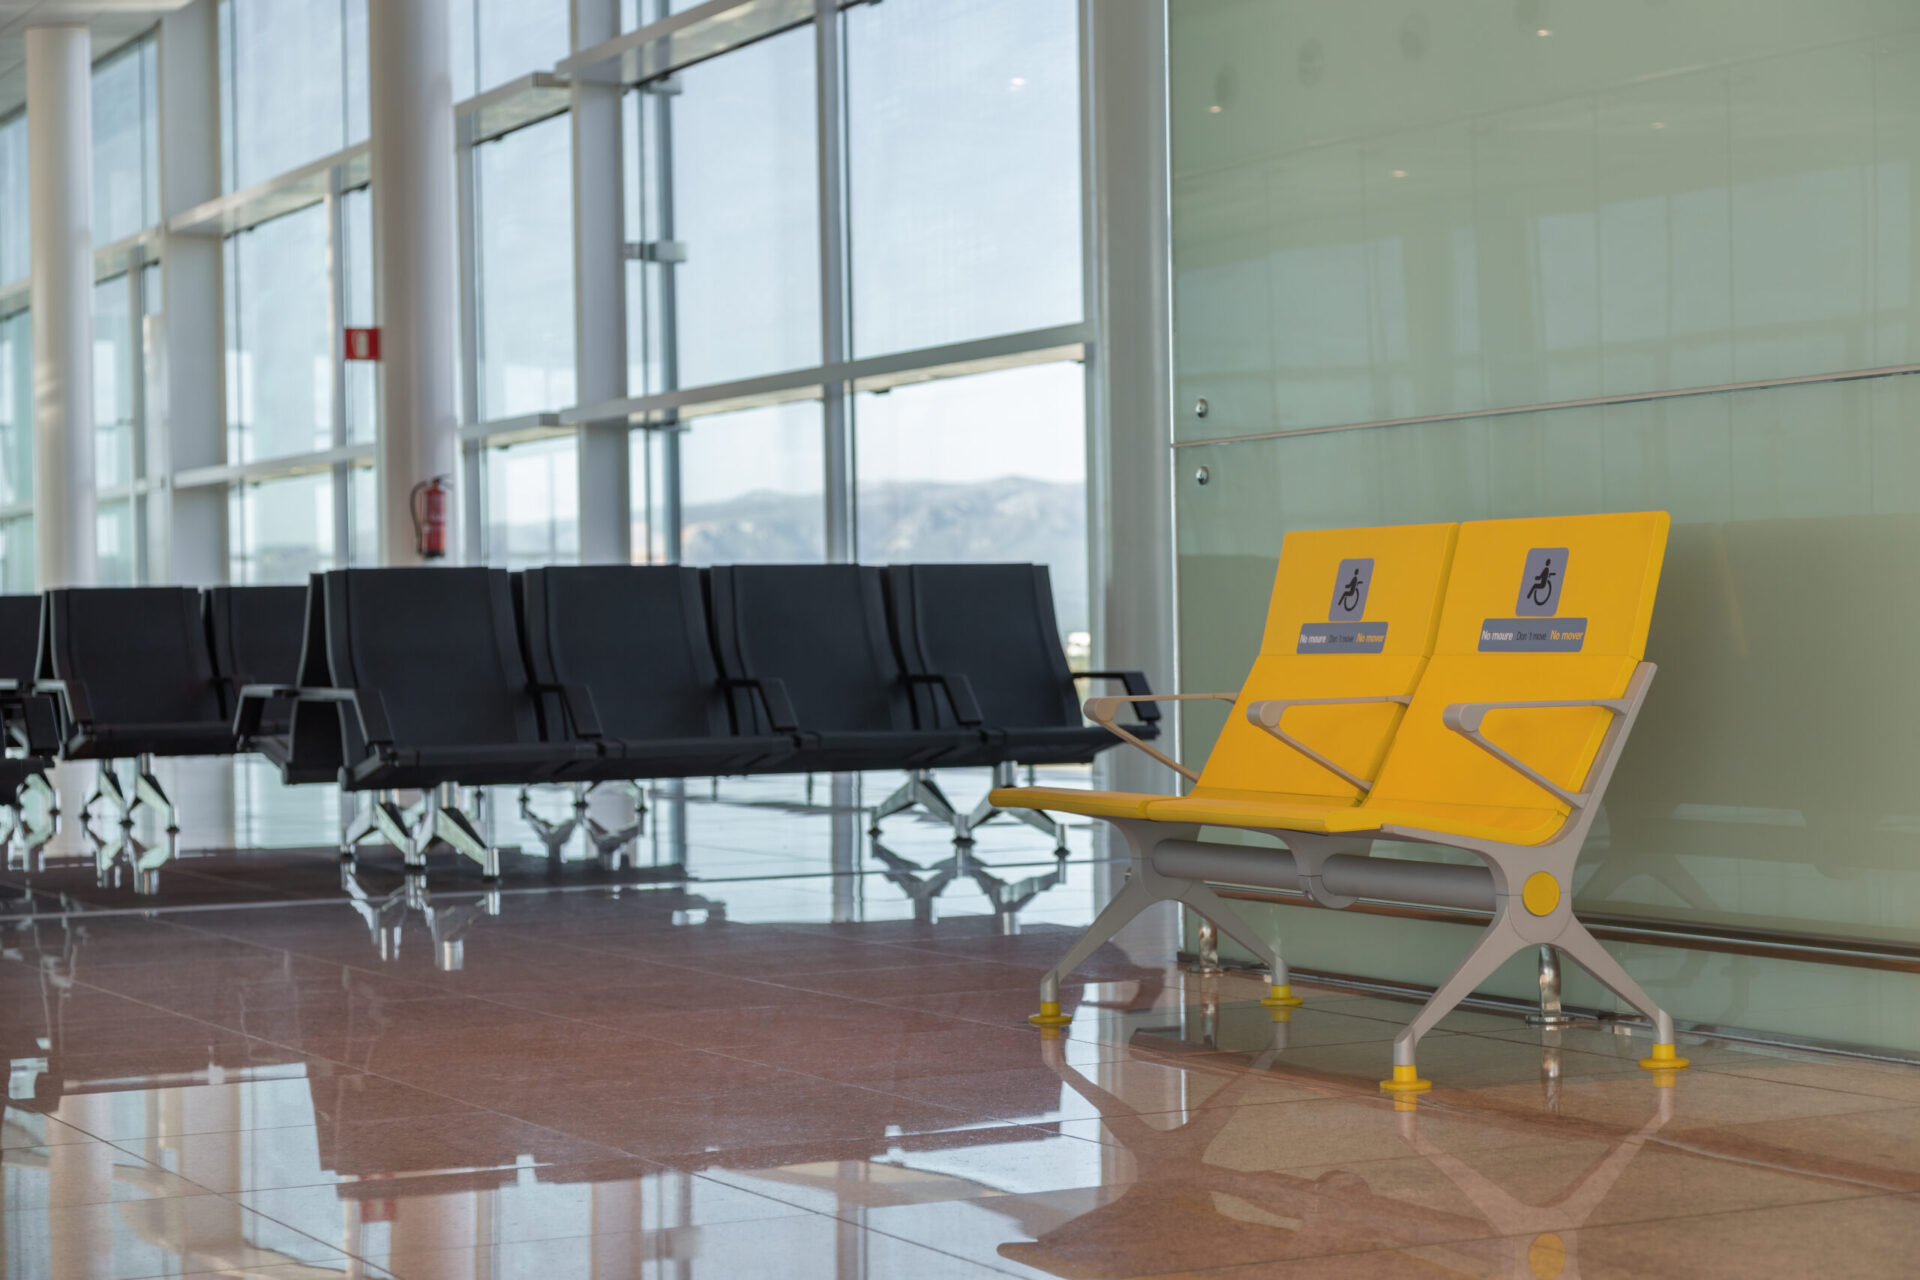 Empty priority seats in international airport reserved for disabled people. Normal and yellow disabled seats in the waiting area before boarding.